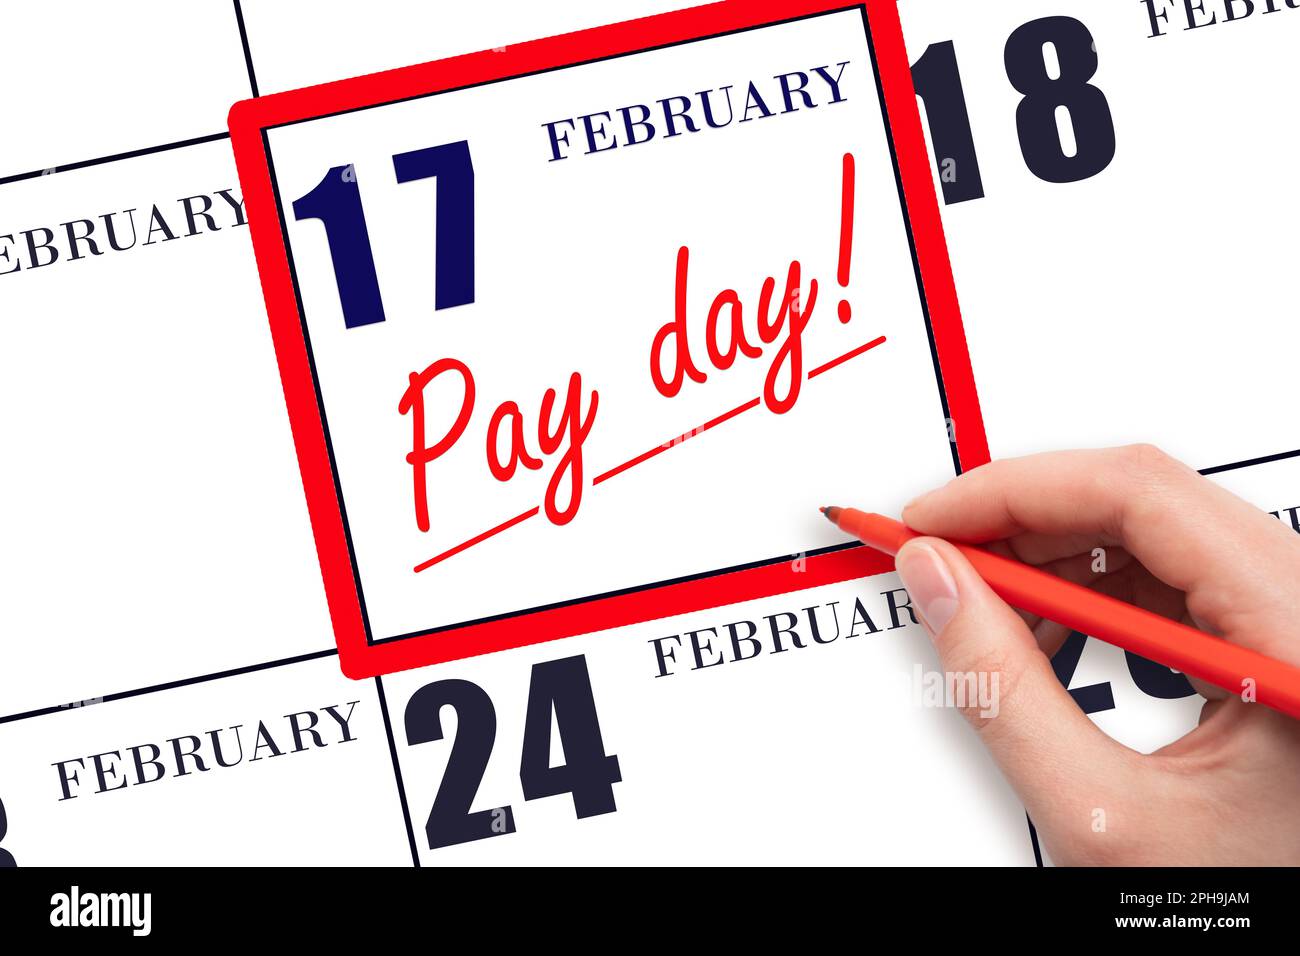 17th day of February. Hand writing text PAY DATE on calendar date February 17 and underline it. Payment due date.  Reminder concept of payment. Winter Stock Photo